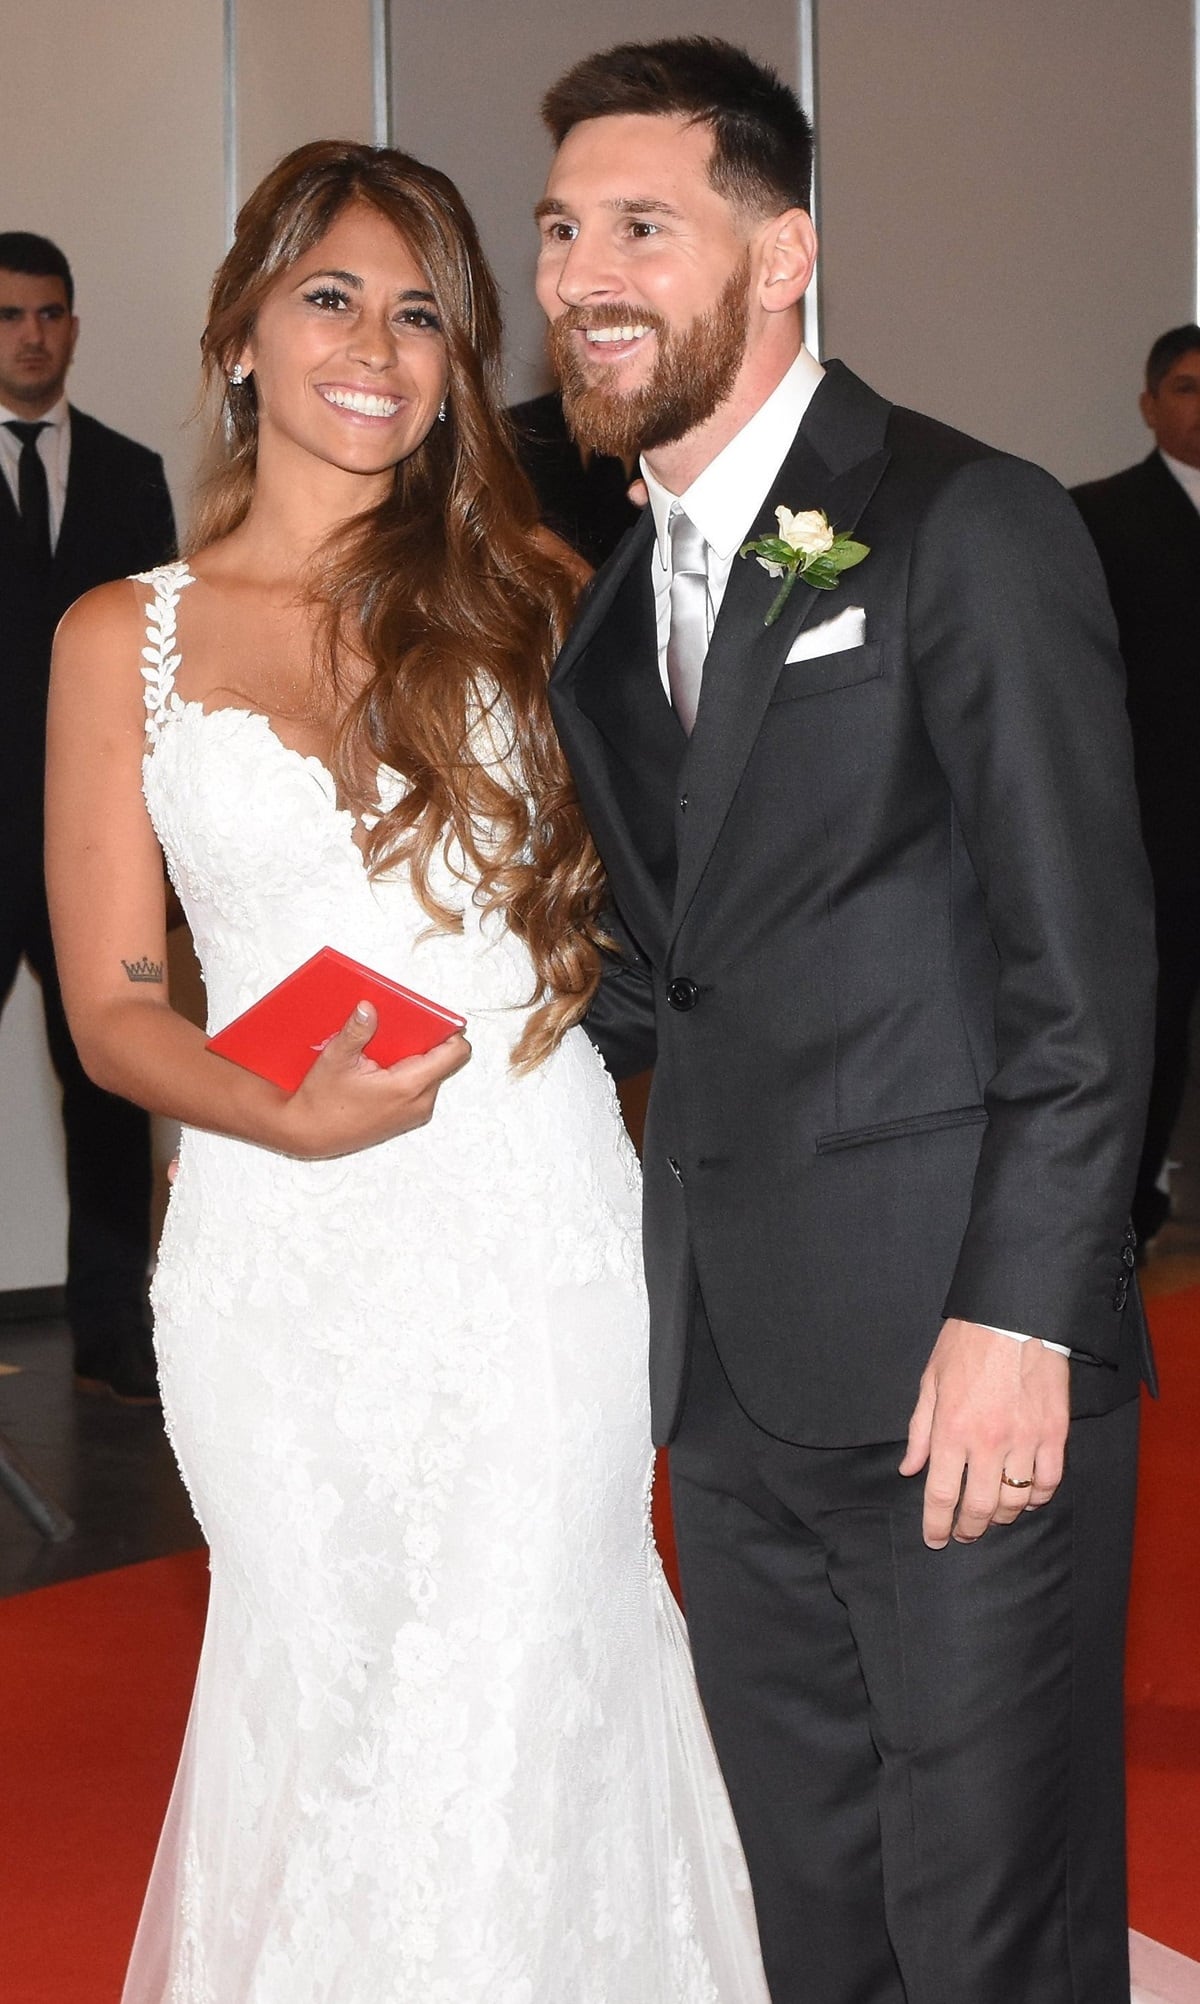 Lionel Messi and Antonela Roccuzzo: Love Story That Defies Height